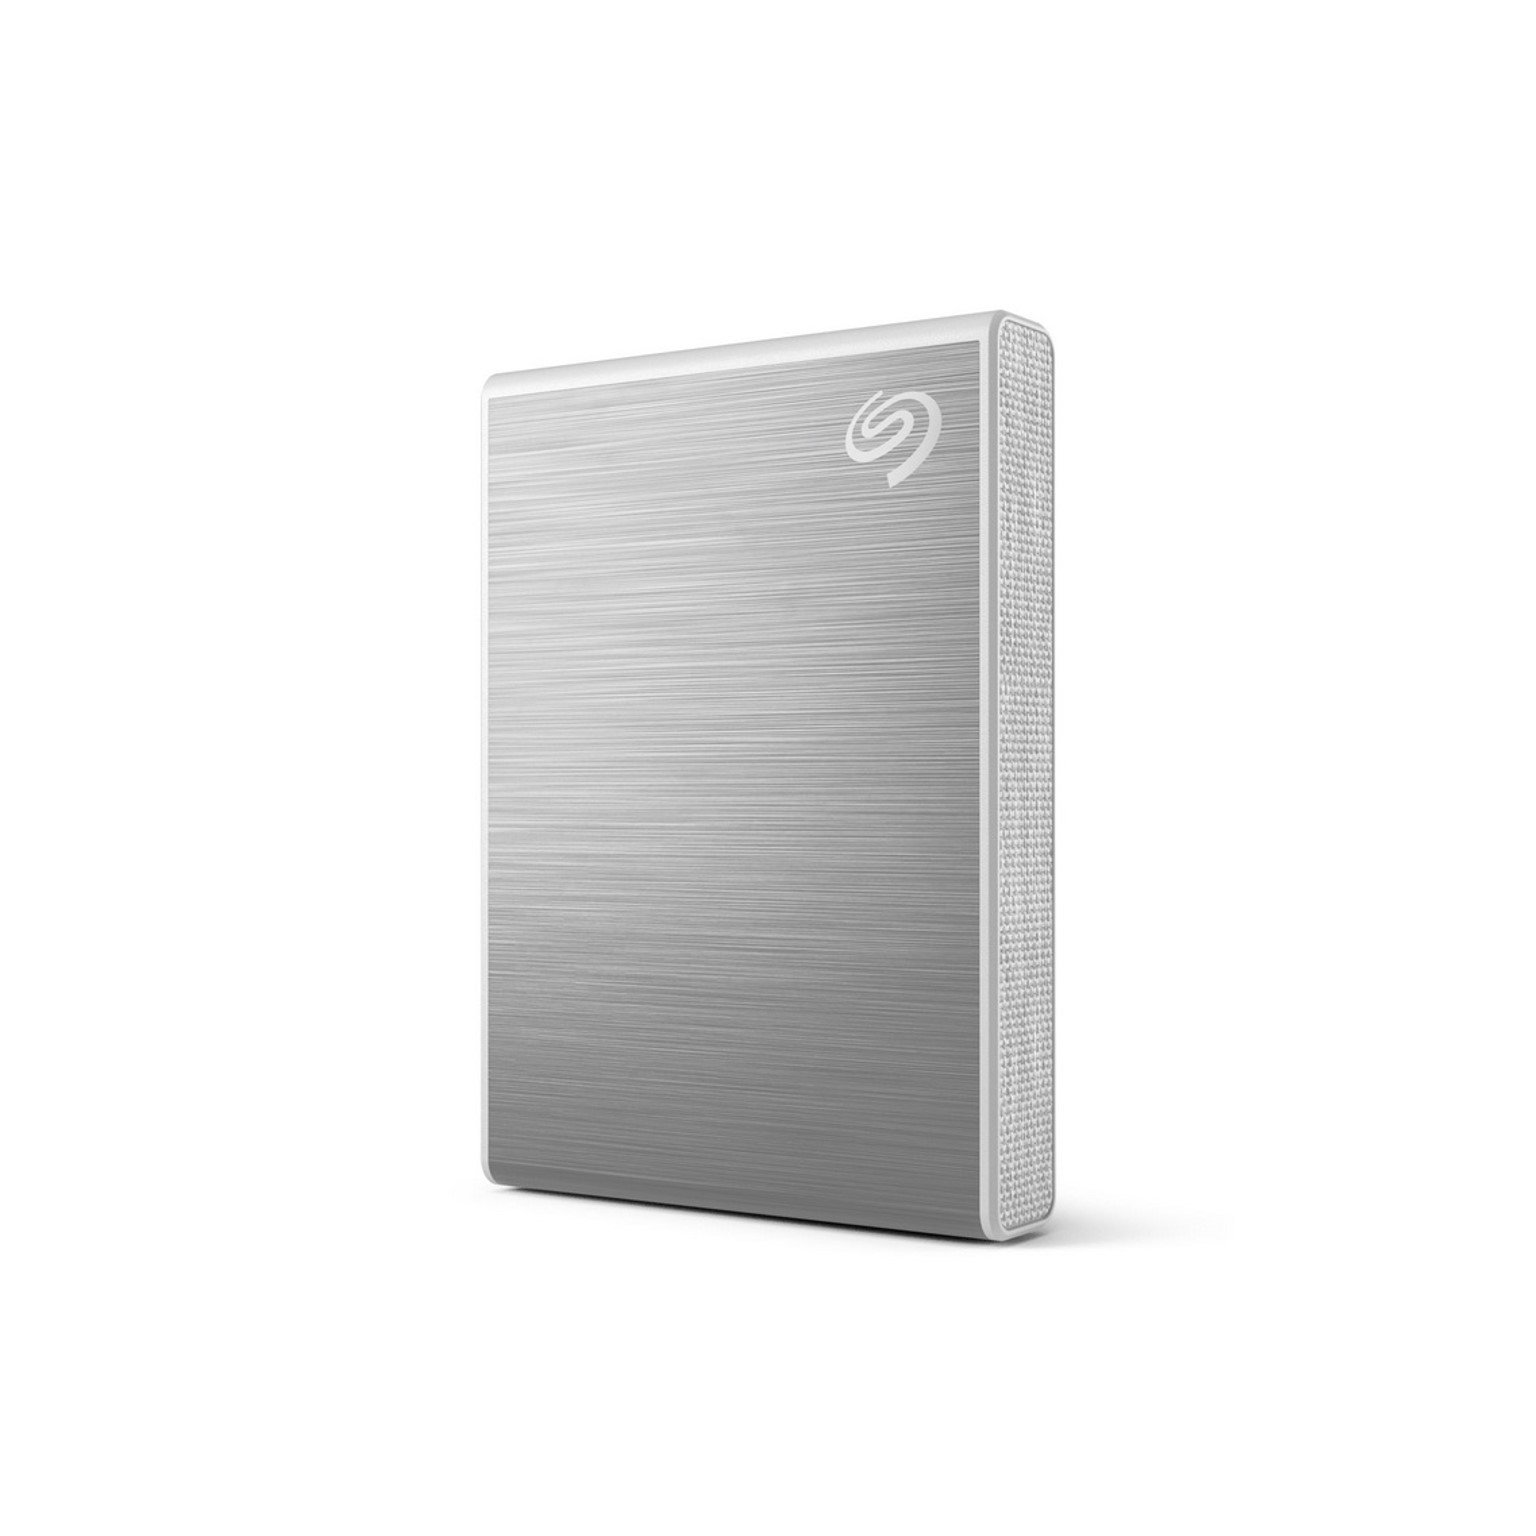 Seagate One Touch SSD 500GB - USB C - Silver